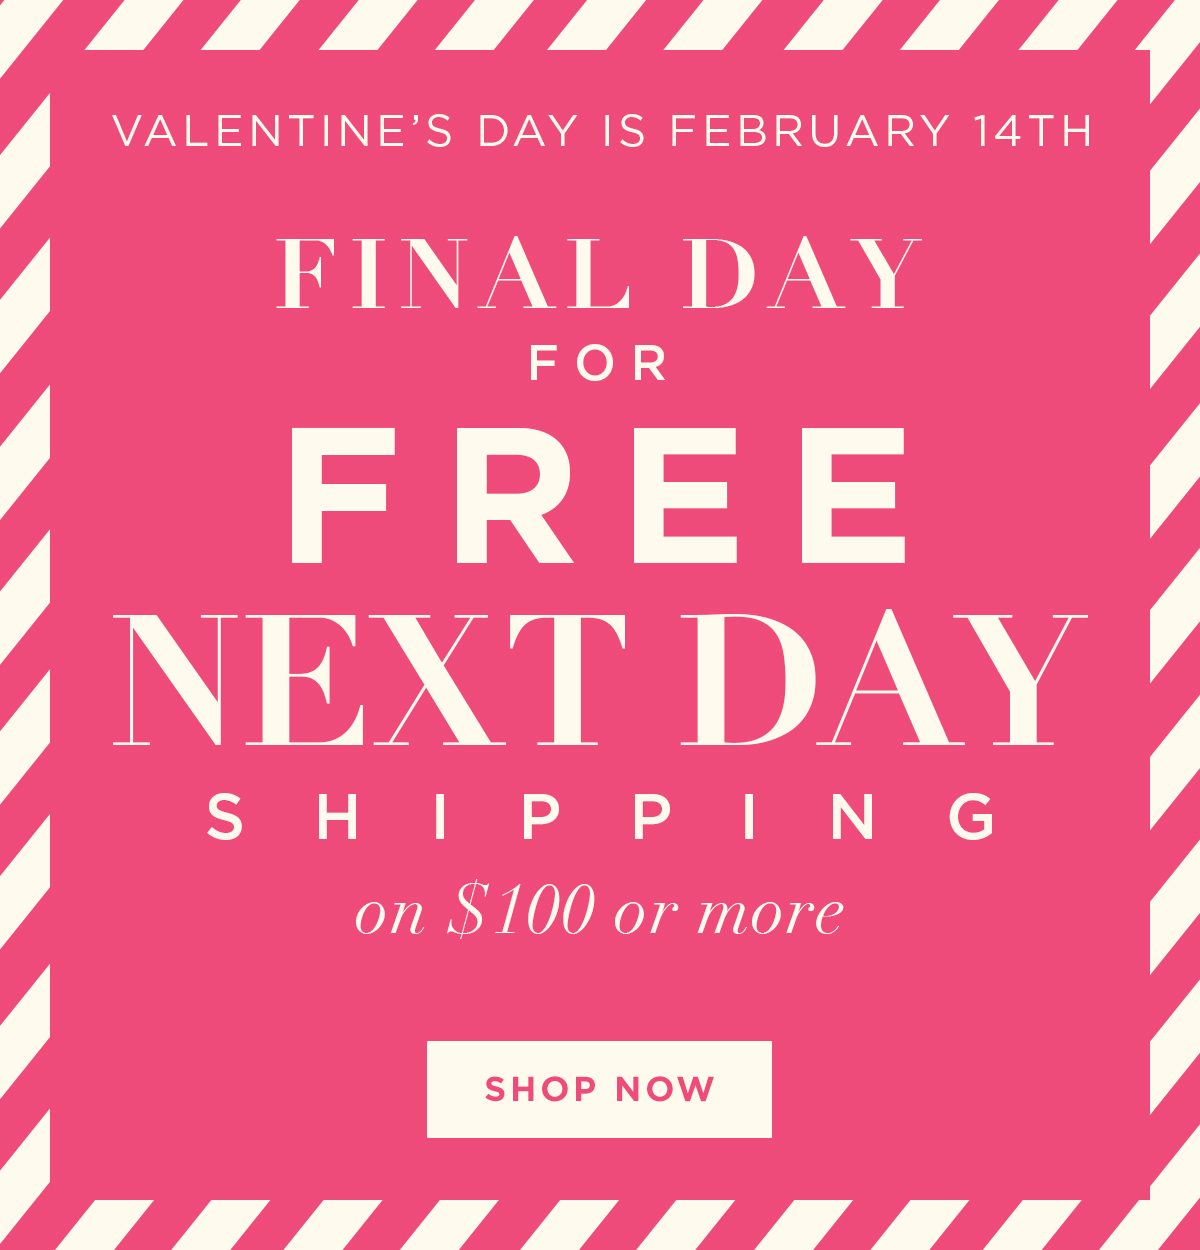 Free Next Day Shipping On $100 Or More - Shop Now